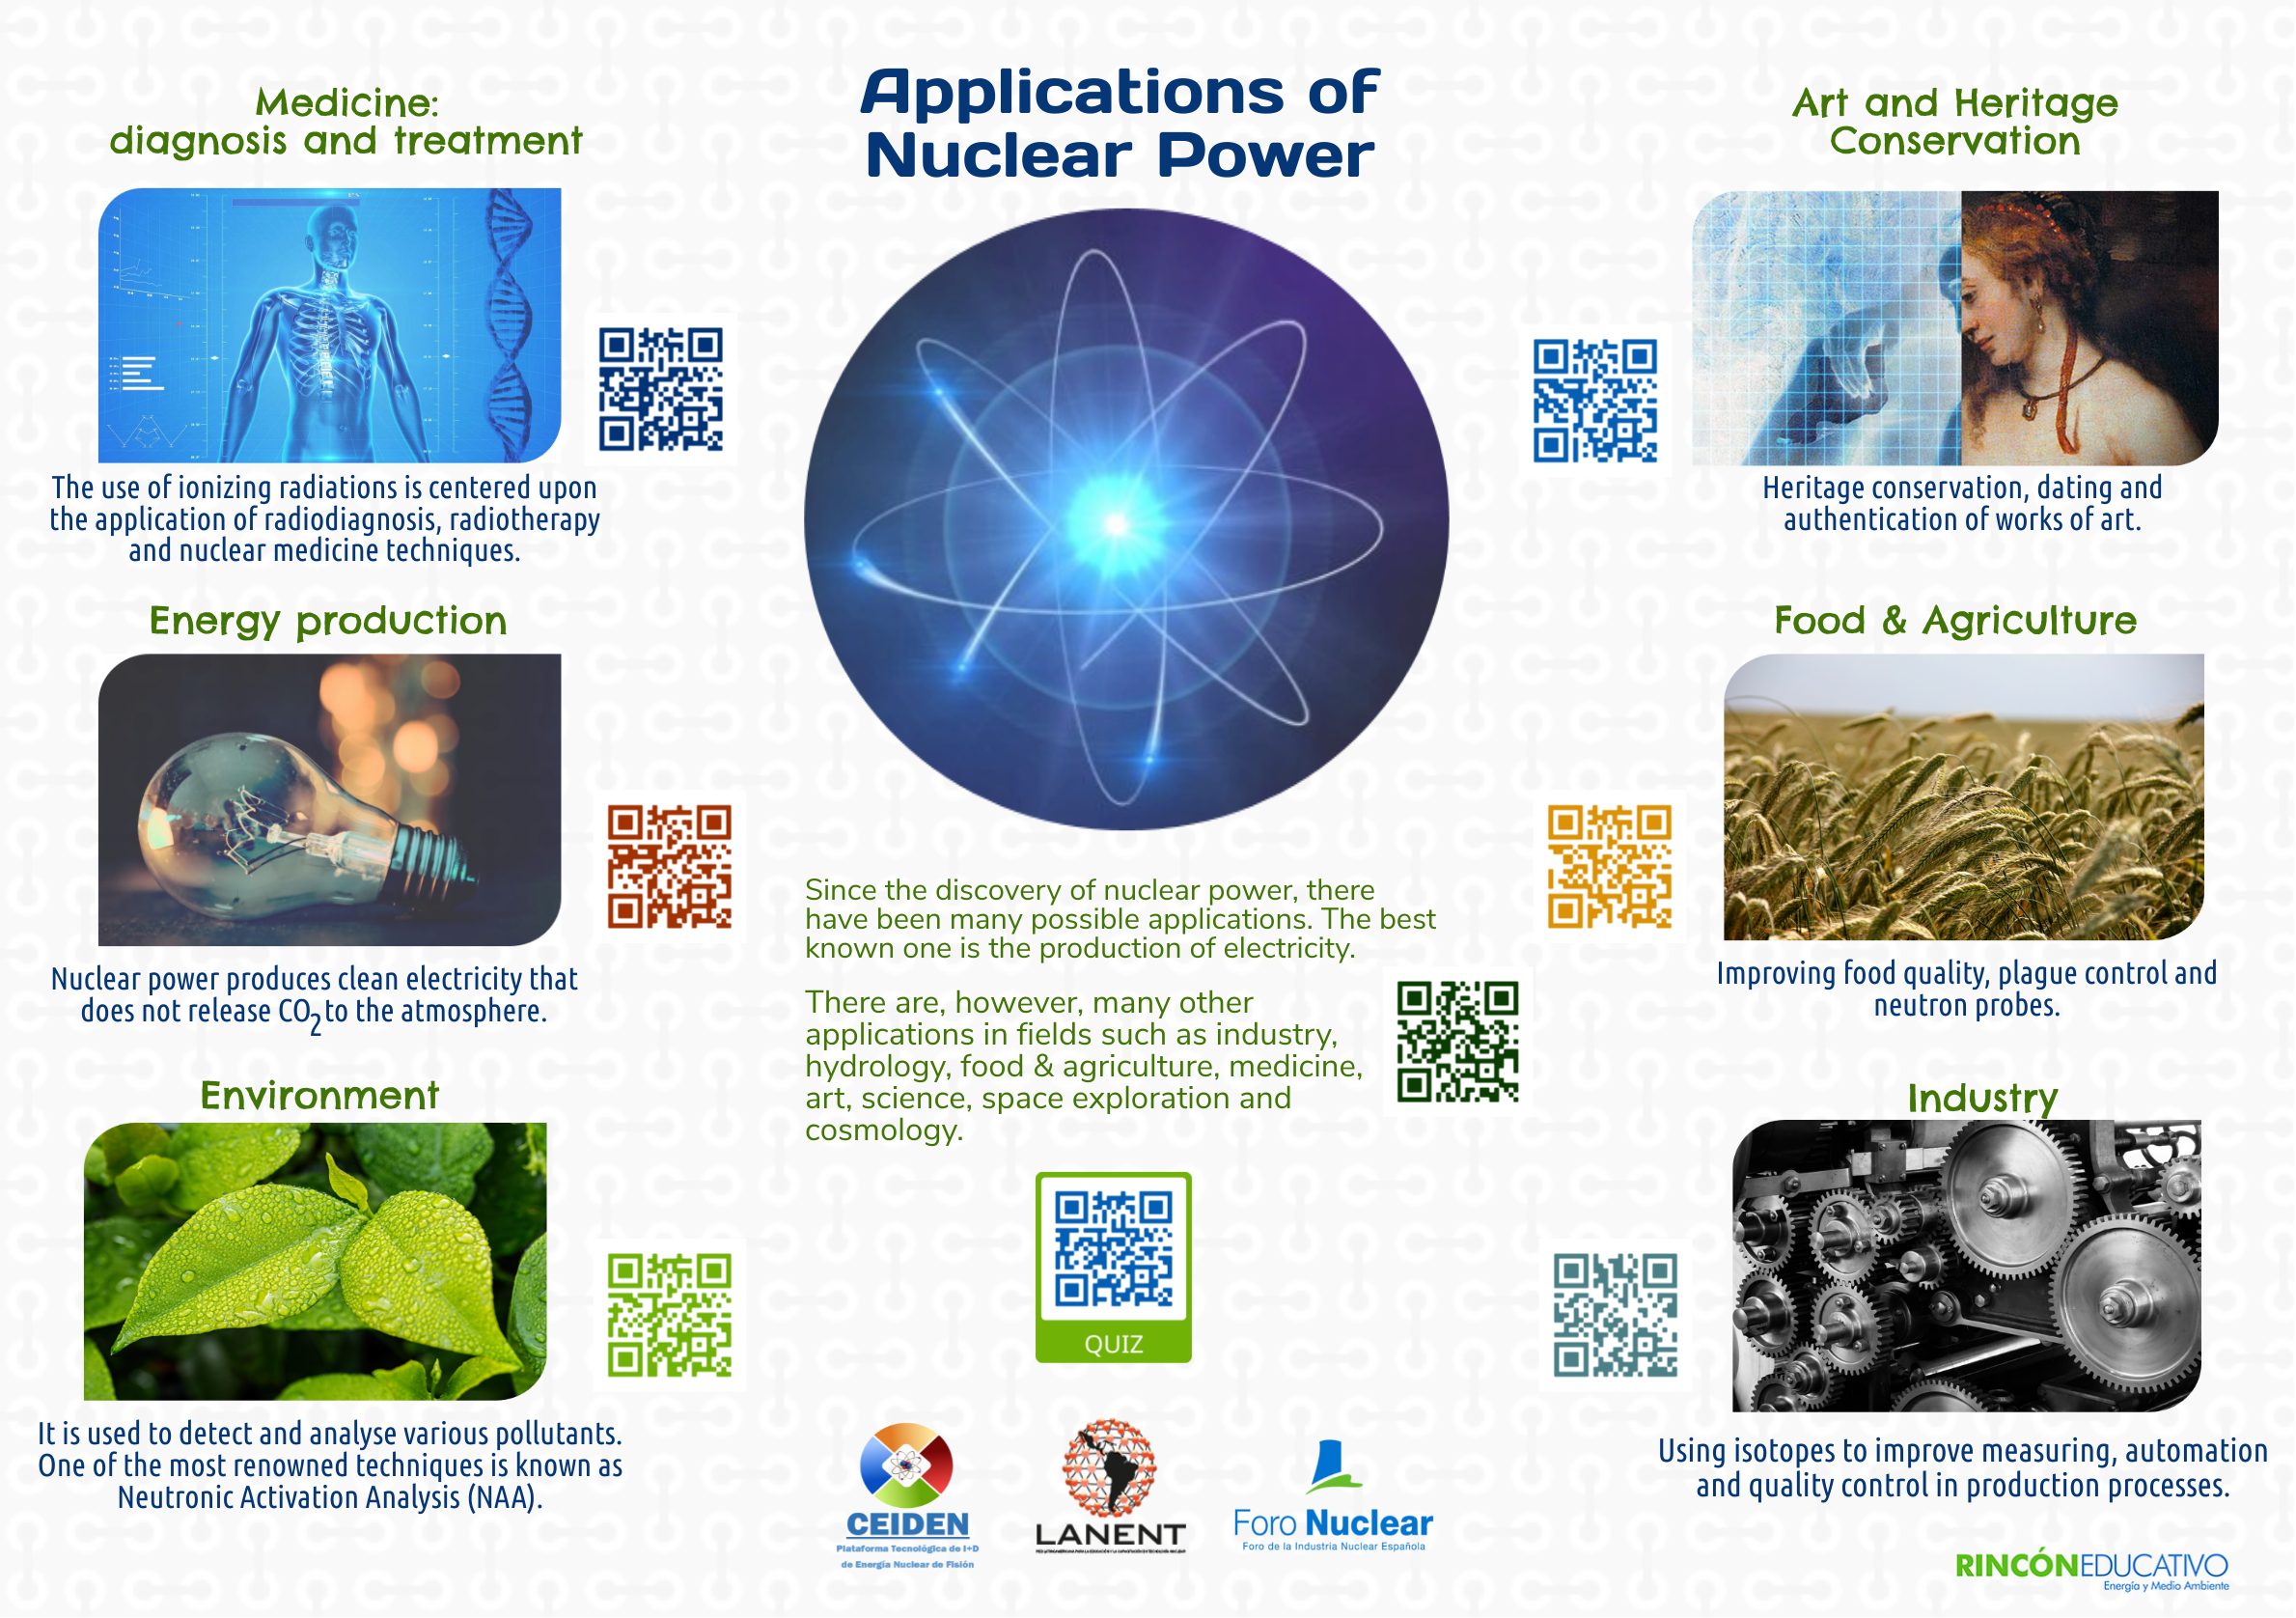 Applications of Nuclear Power